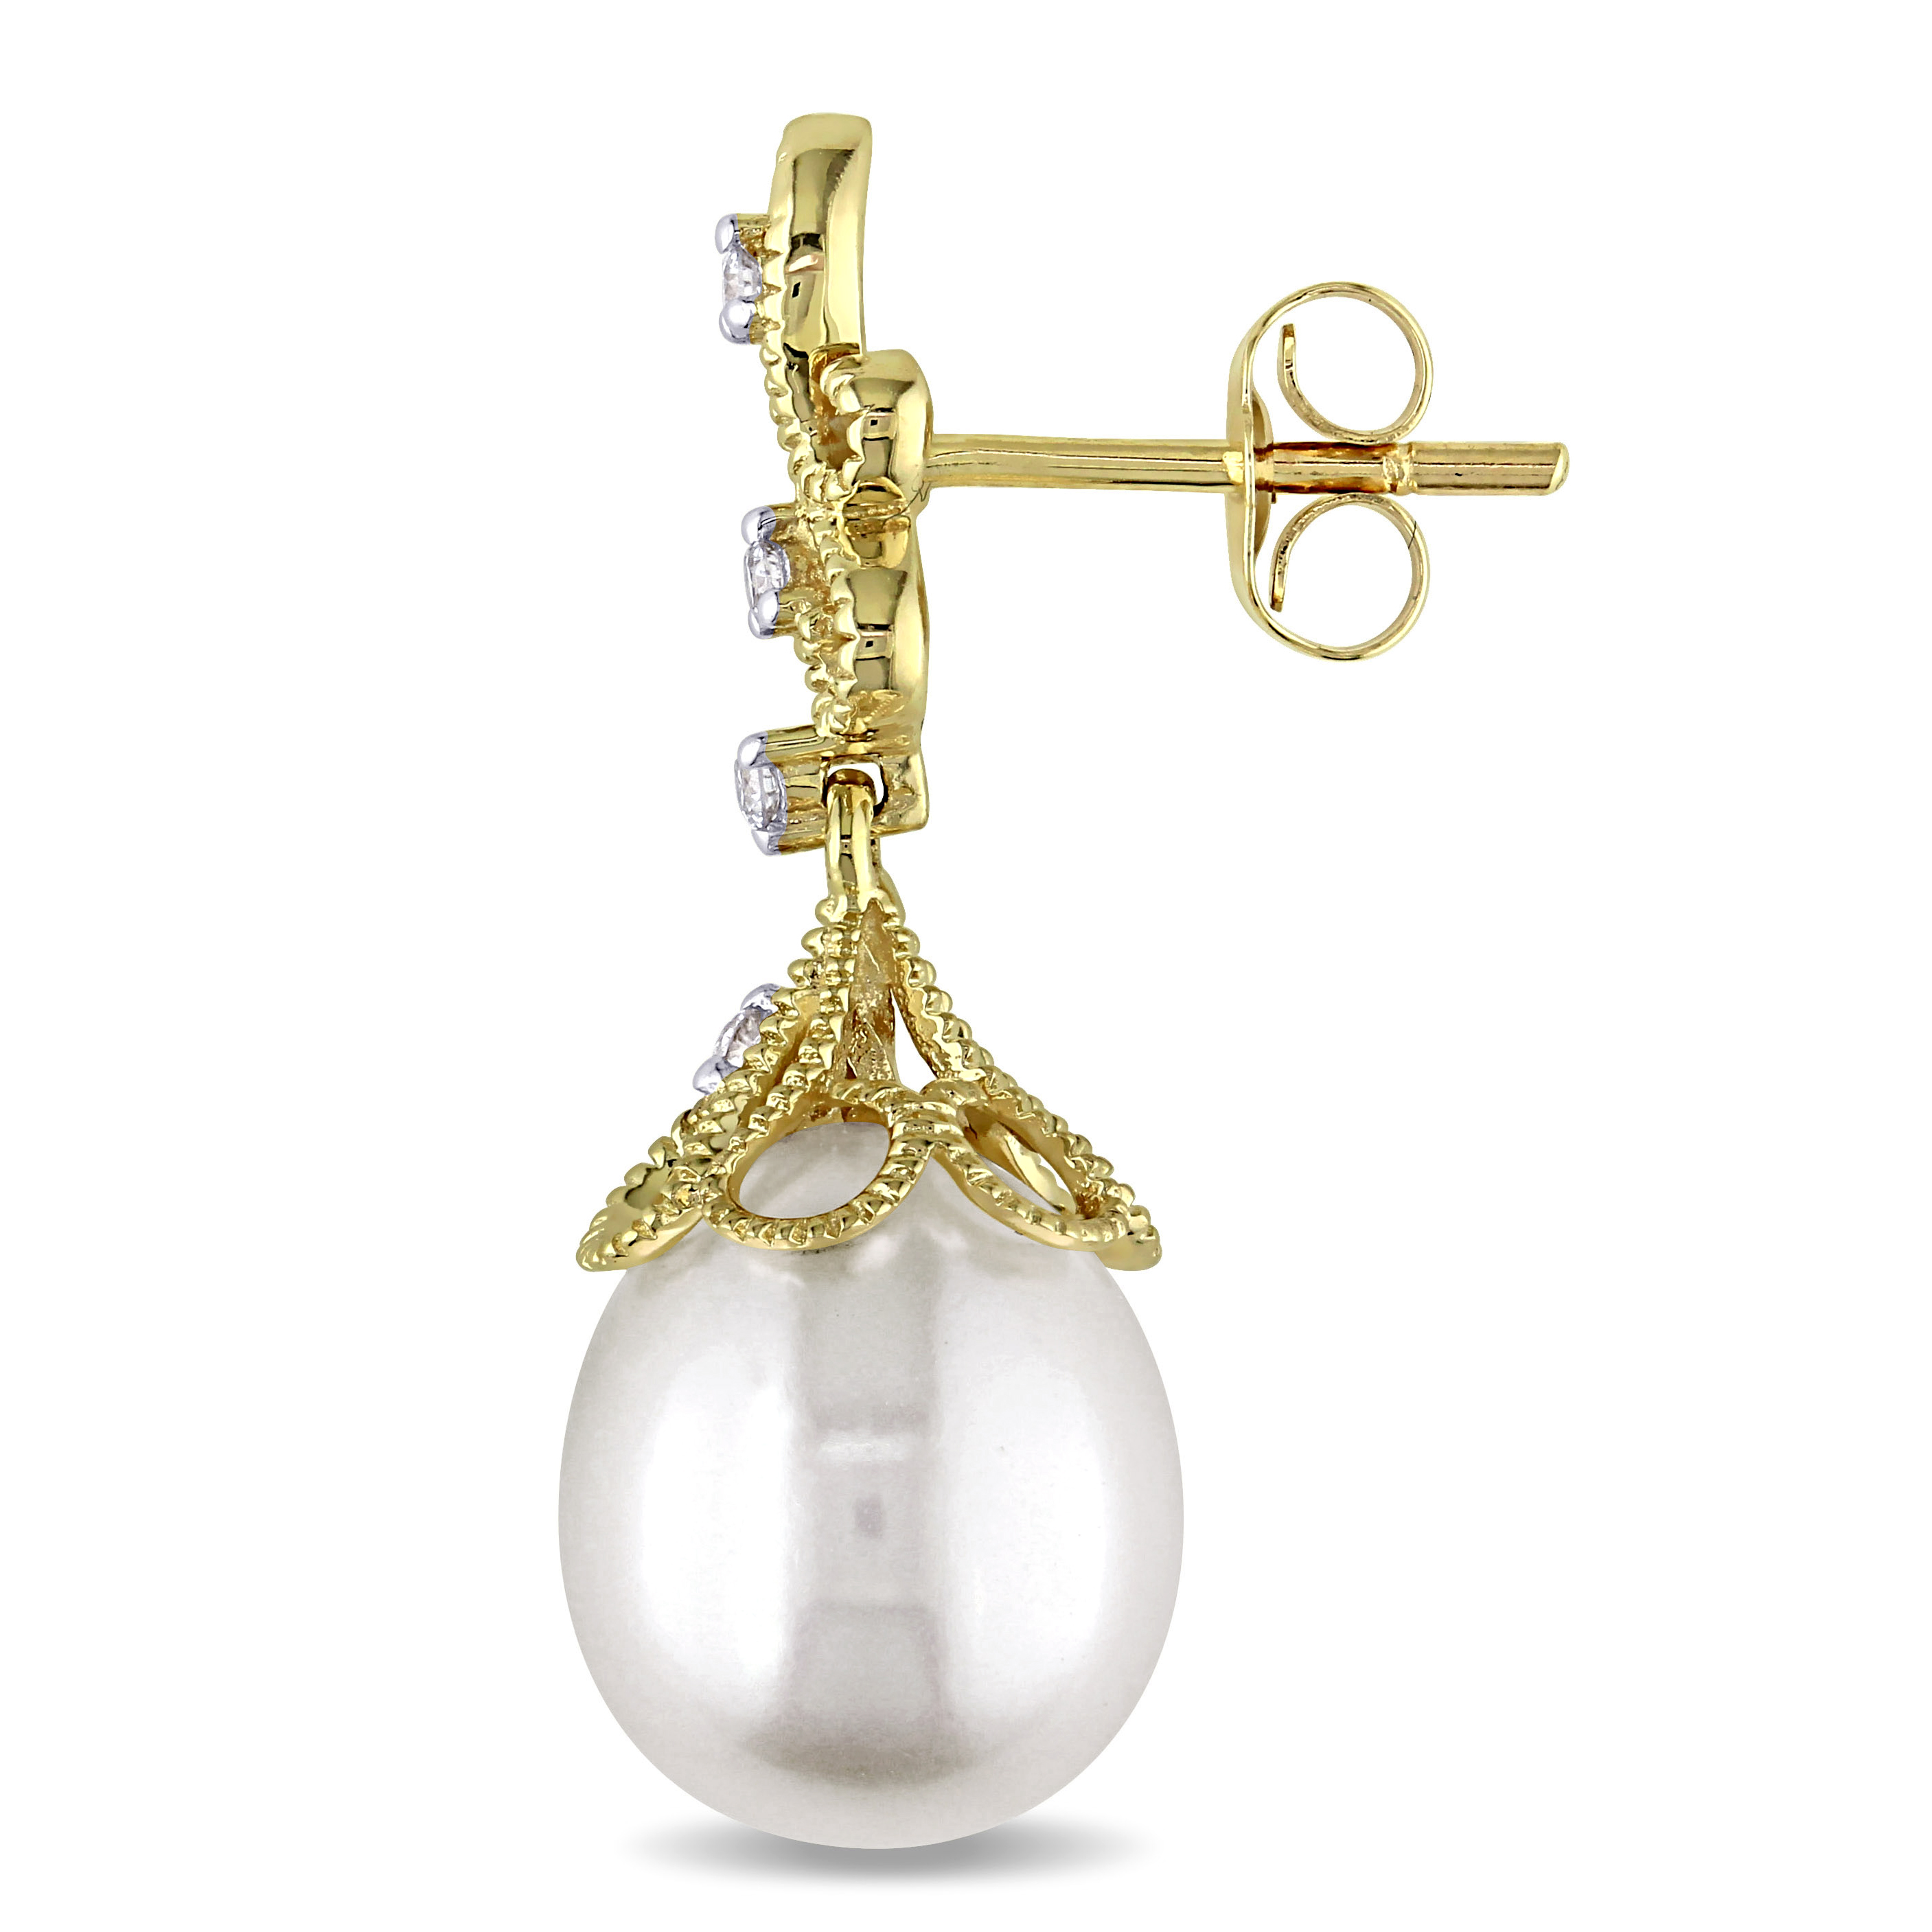 9 - 9.5 MM Cultured Freshwater Pearl and 1/10 CT TW Diamond Vintage Drop Earrings in 14k Yellow Gold